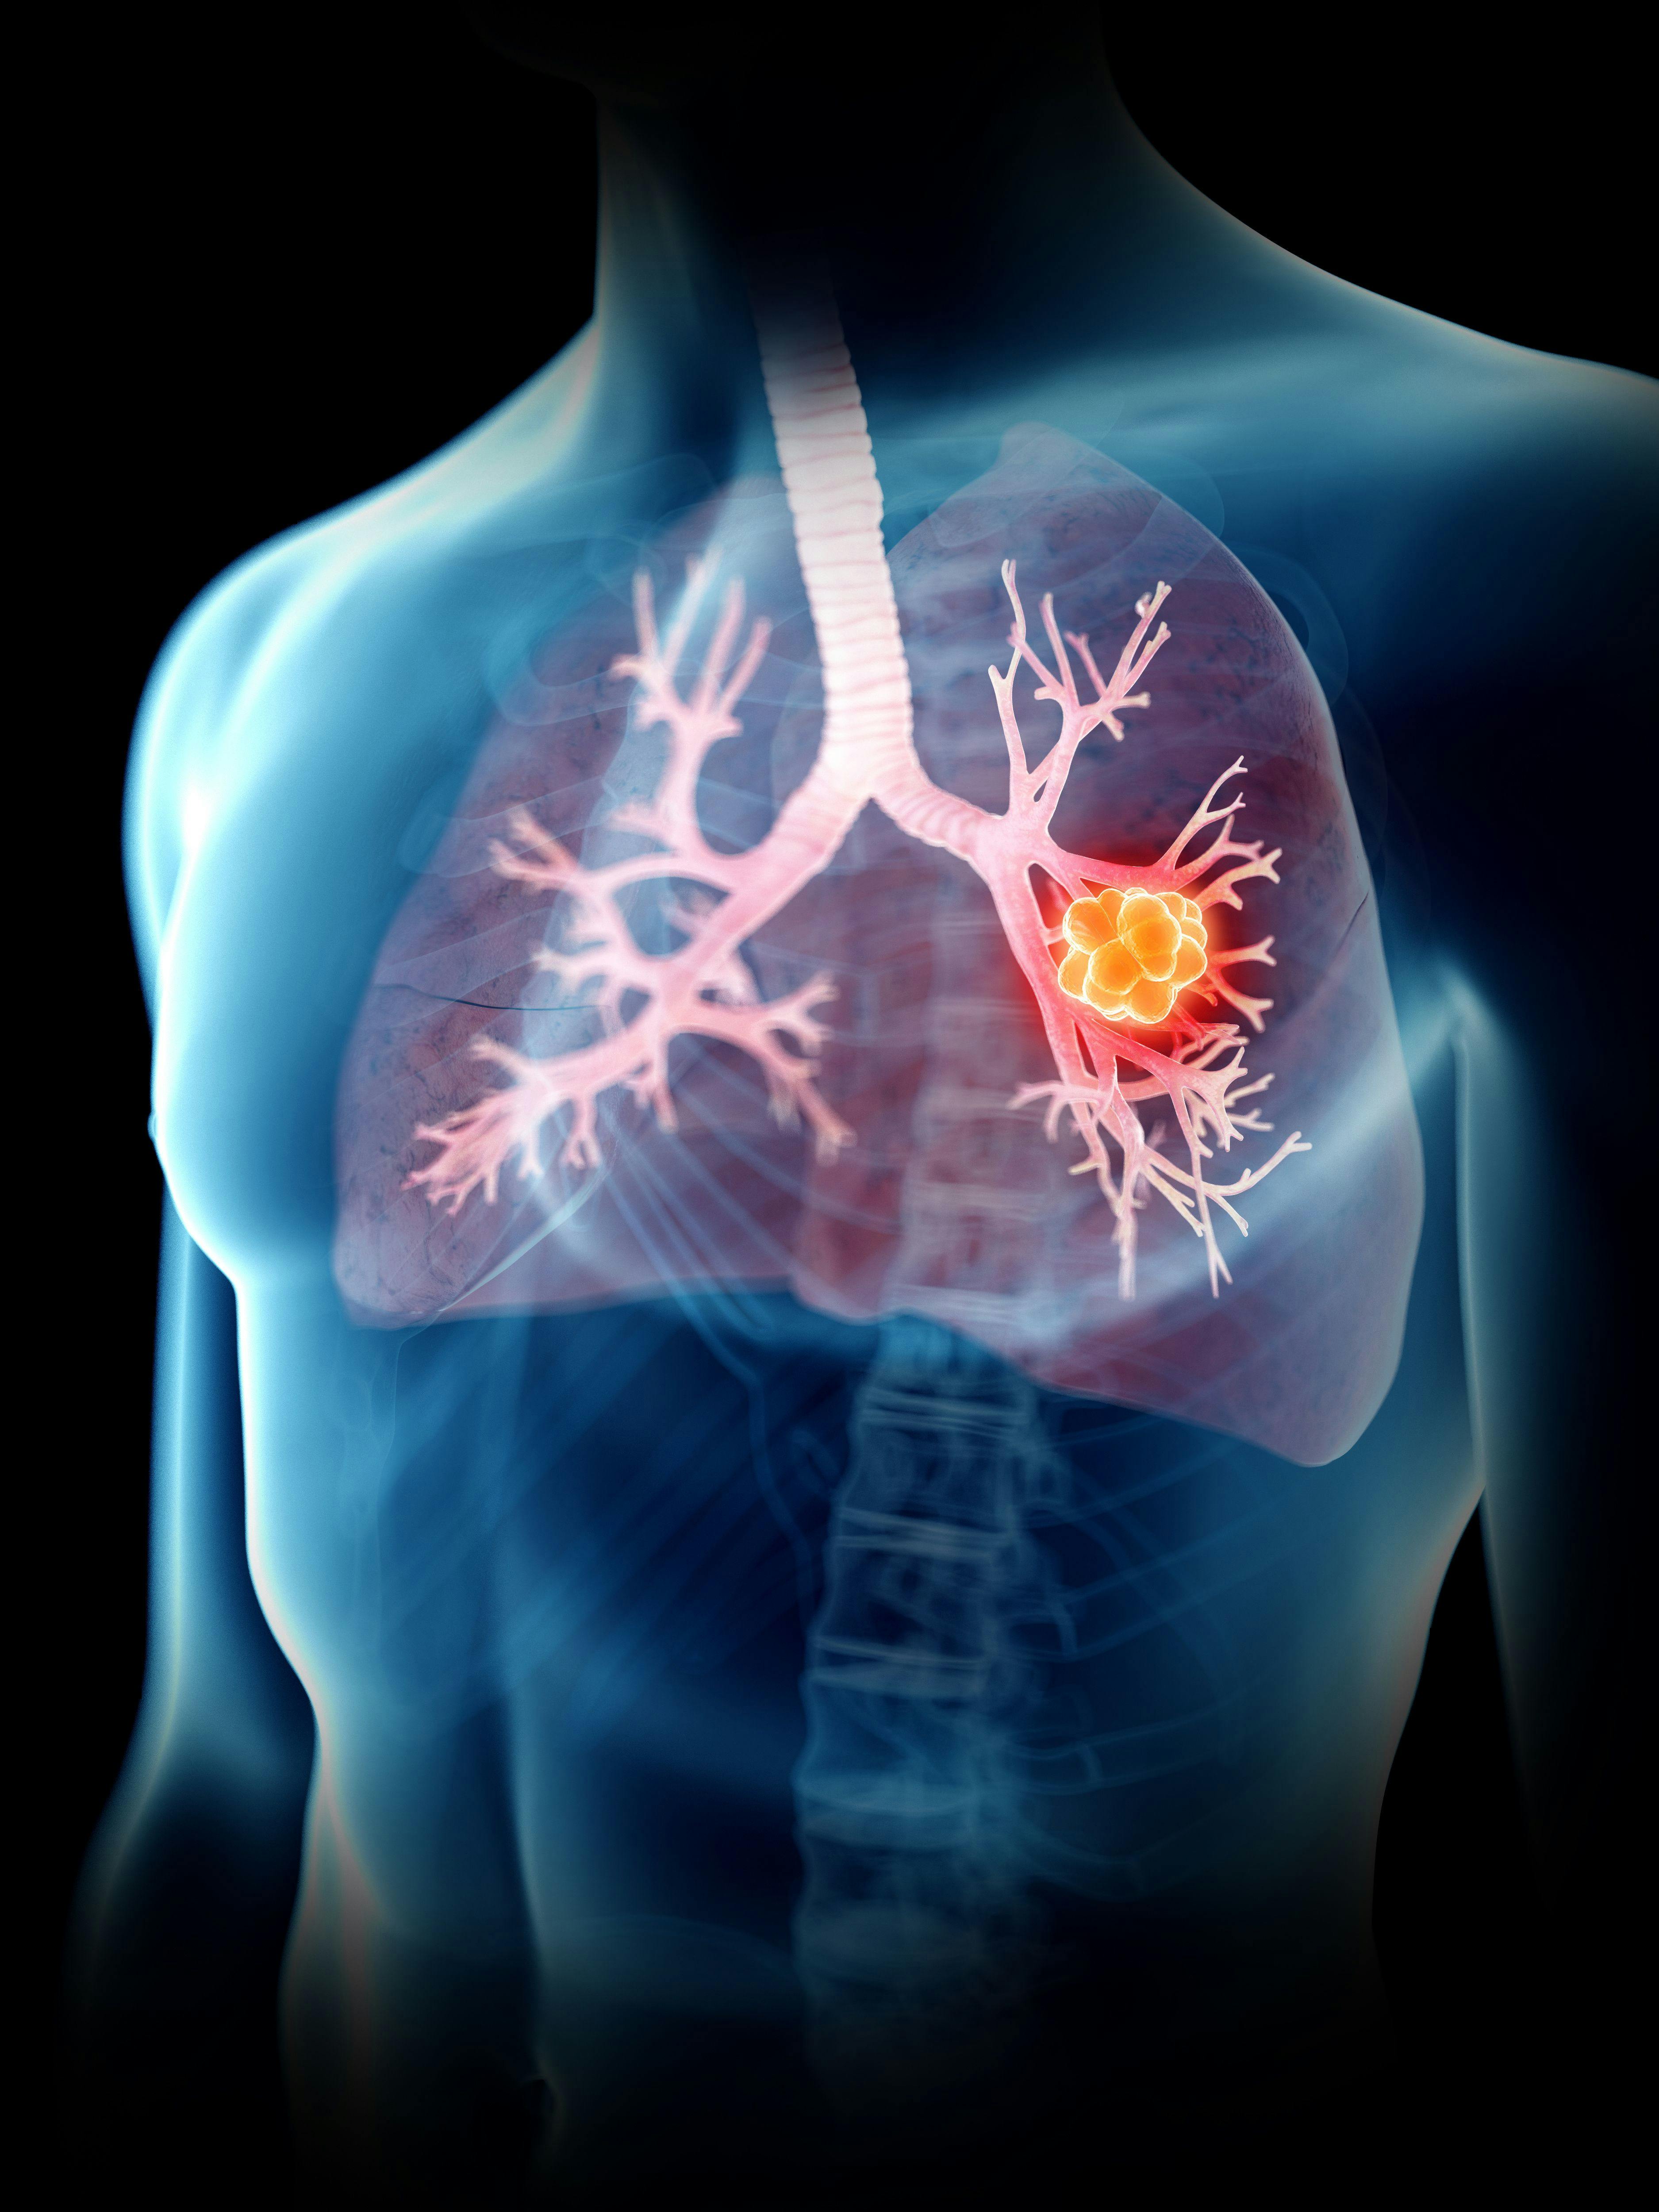 3d rendered medically accurate illustration of a lung tumor: © SciePro - stock.adobe.com